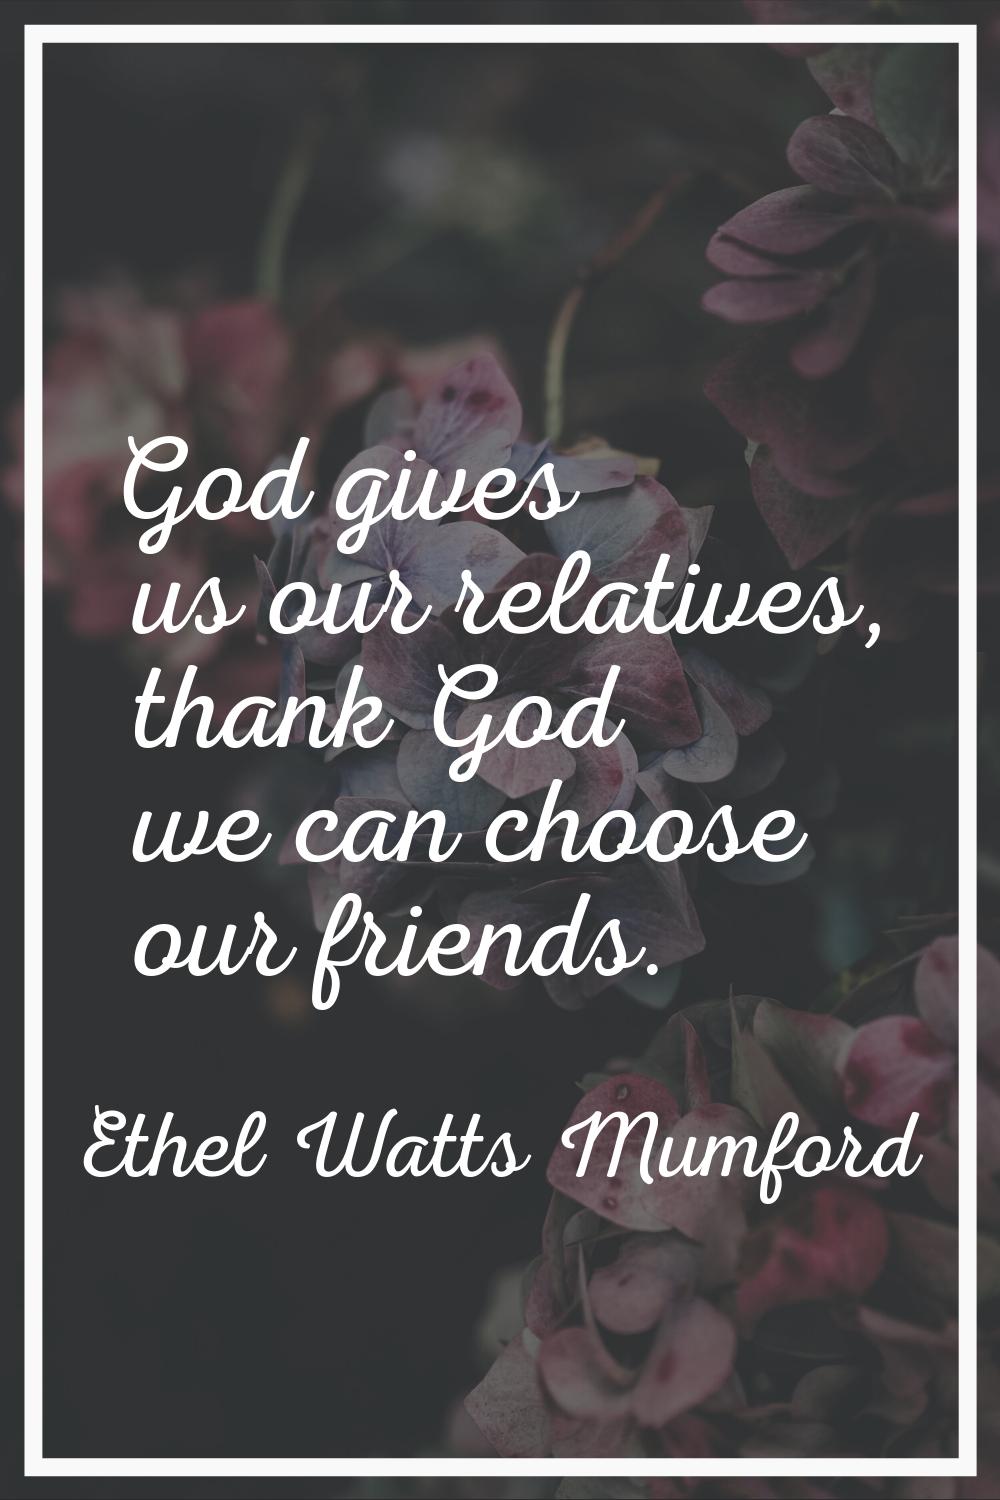 God gives us our relatives, thank God we can choose our friends.